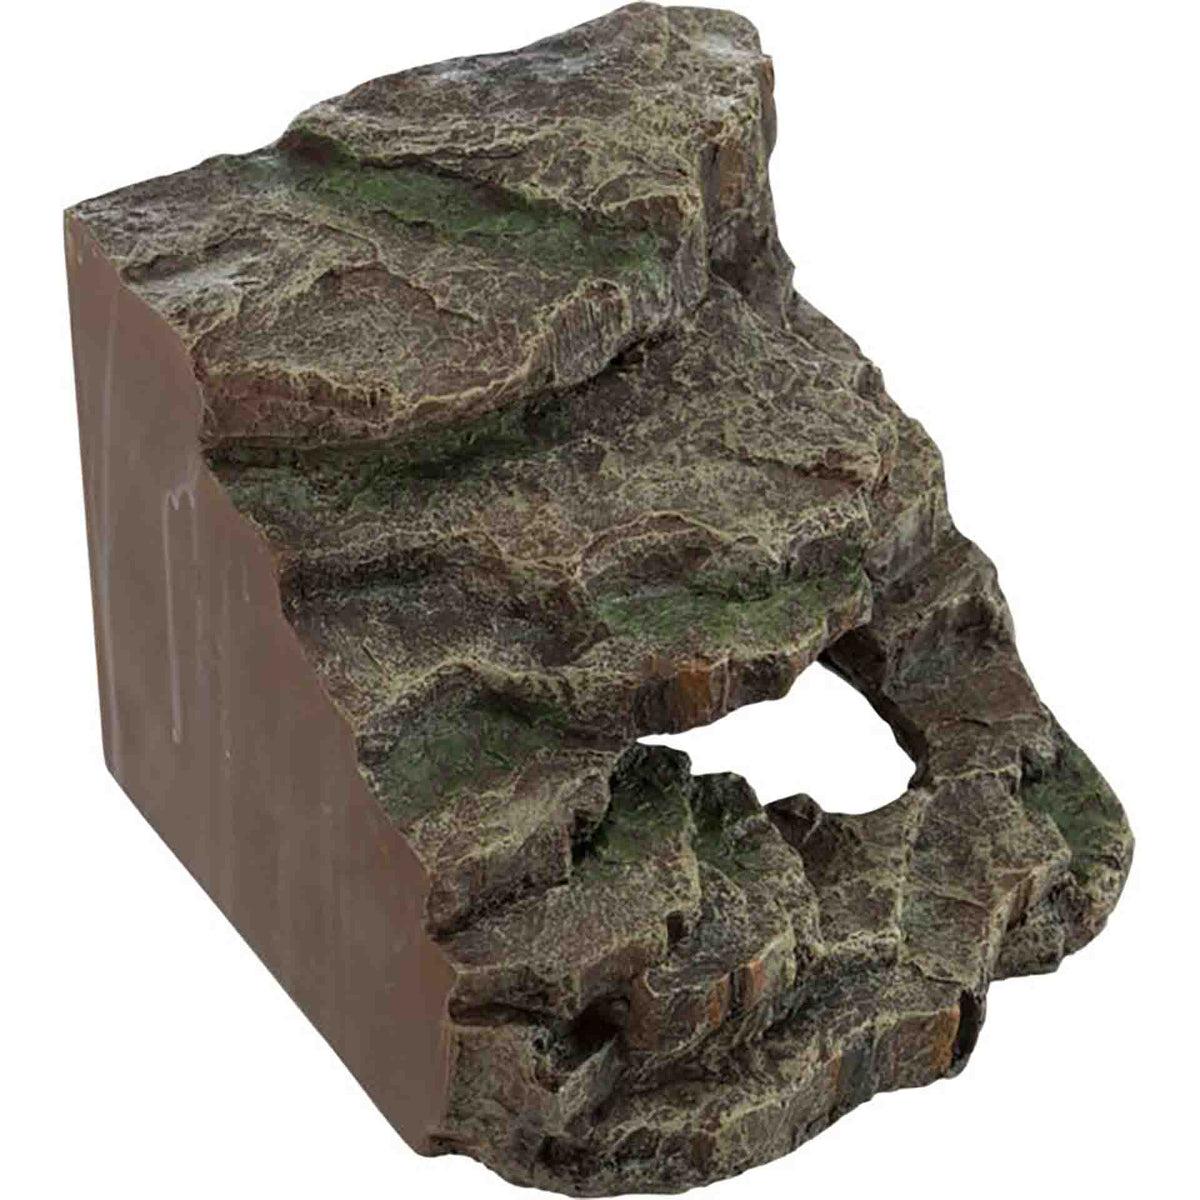 Trixie Corner Rock with Cave and Platform - 19 x 16 x 18cm